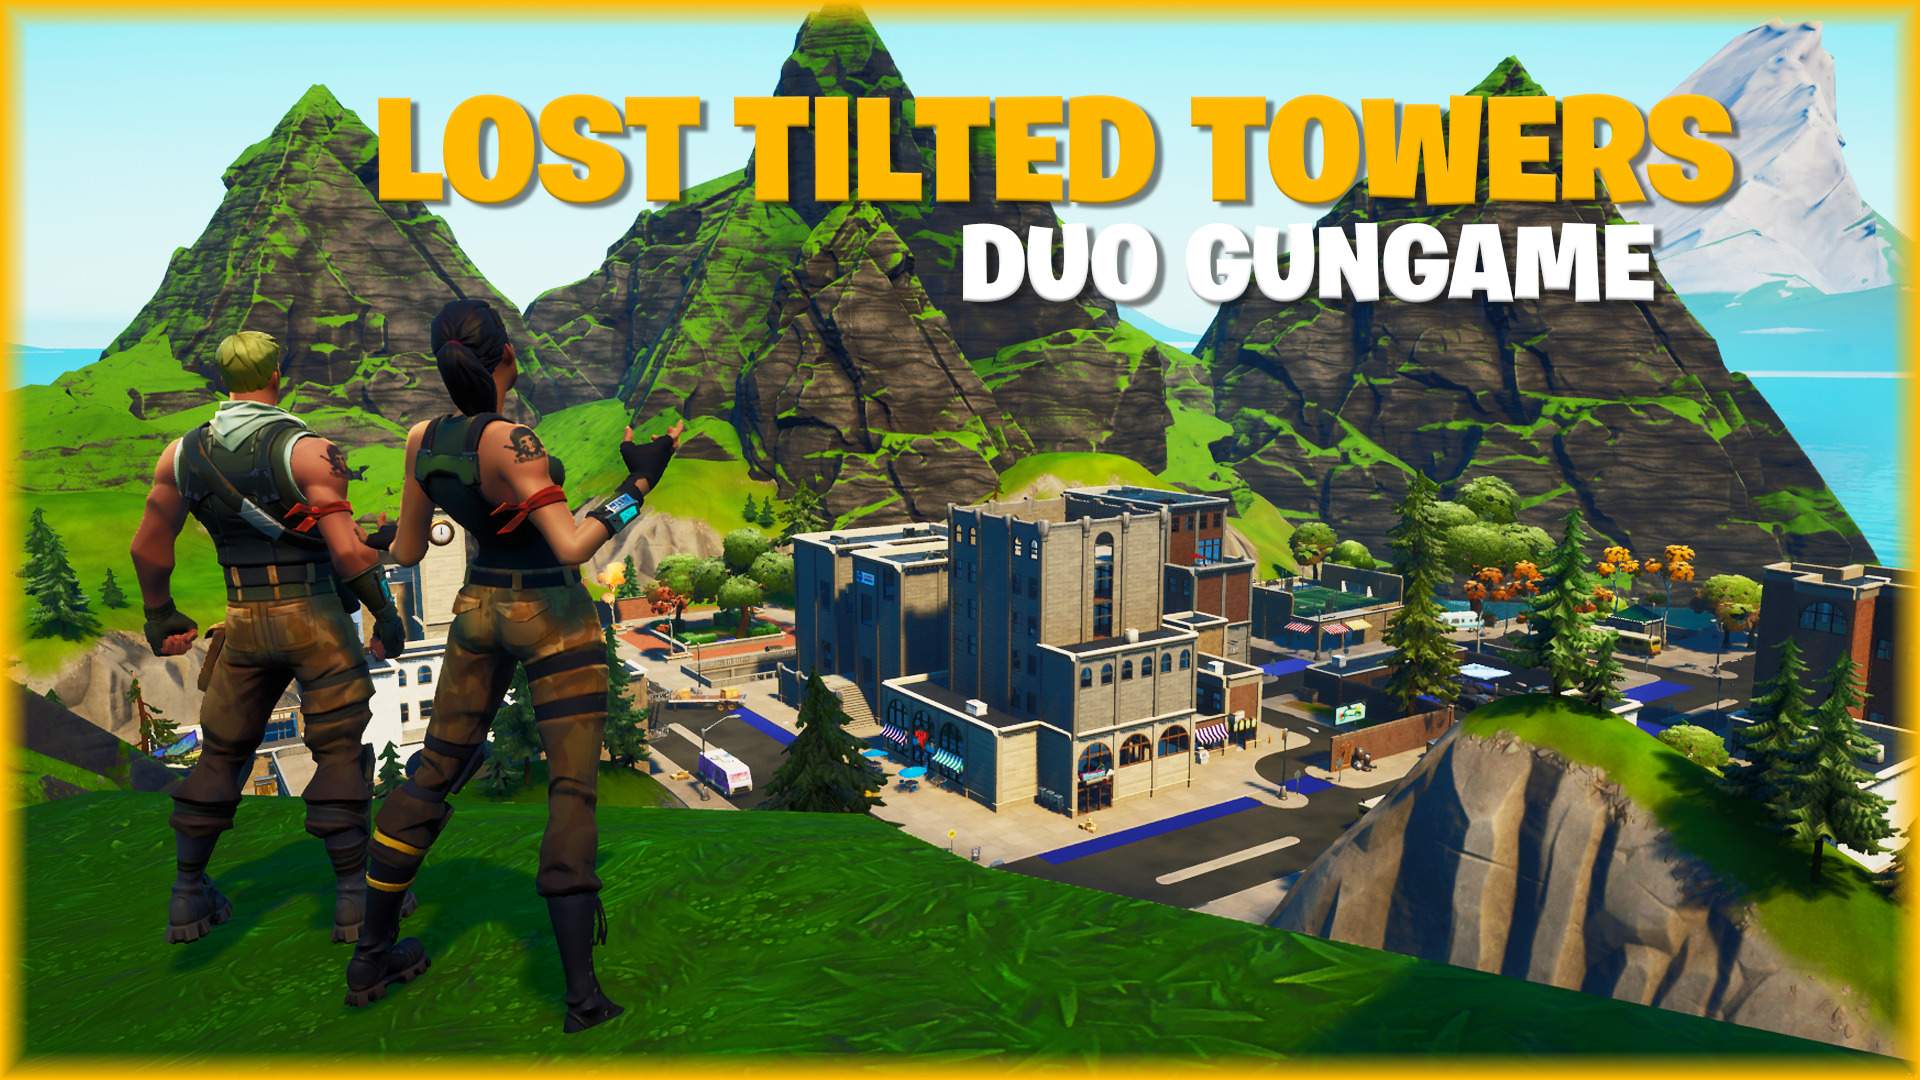 LOST TILTED TOWERS : DUO GUN GAME